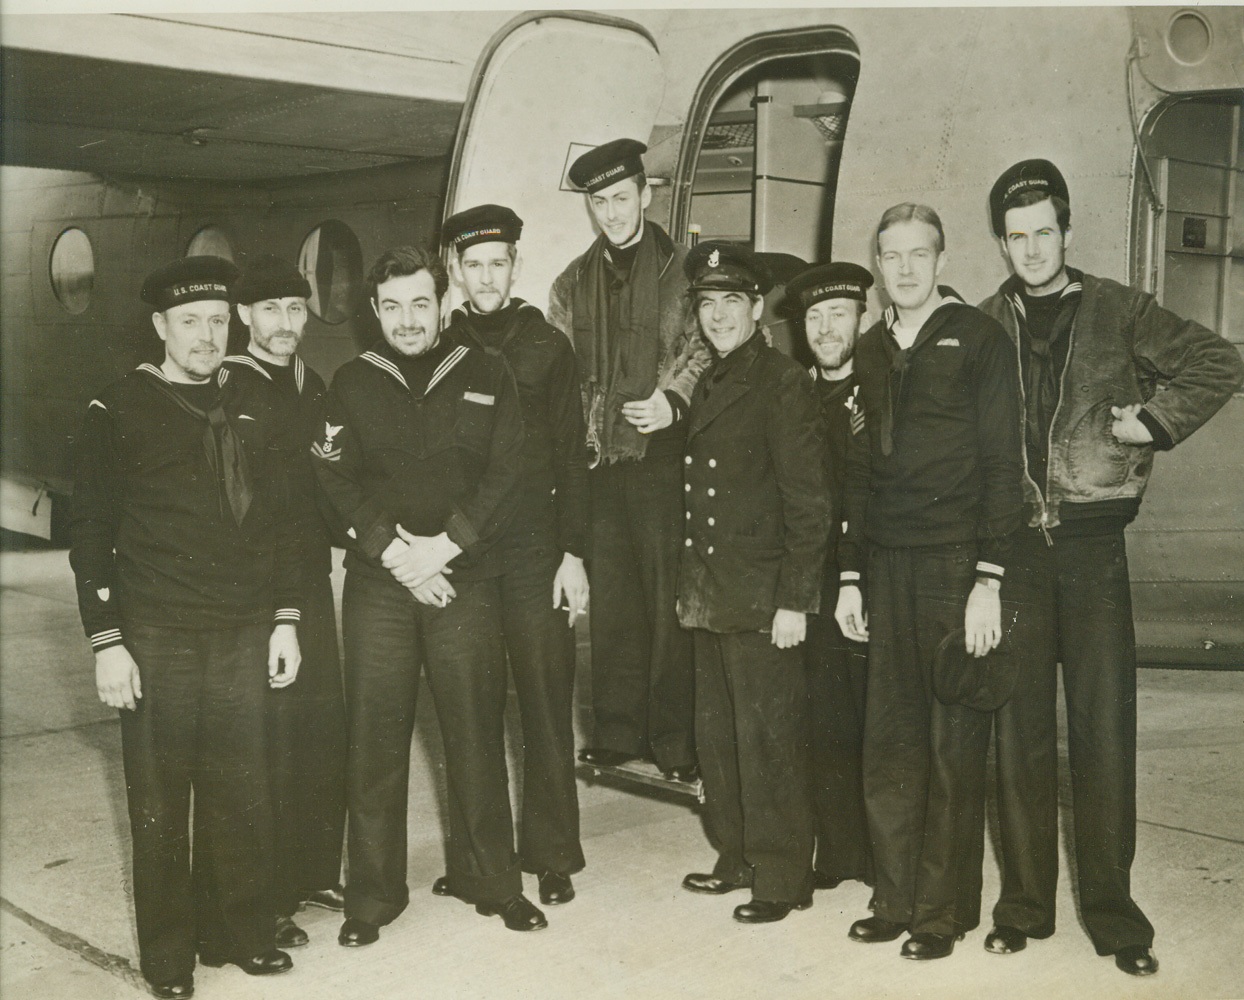 STOOD OFF DAVY JONES FOR THREE LONG WEEKS, 12/24/1942. NEW YORK CITY, NEW YORK – They are nine battered members of the Coast Guard Reserve. They were battered about the Atlantic in their fifty-eight-foot yawl, a slim craft built for racing, for twenty-one days. They were swept helplessly before winds of hurricane force that carried them 3,100 miles from a point more than 100 miles off a Canadian port to Cape Hattoras, N.C. They were rescued today thanks to the vigilance of officers and men of the Eastern Sea Frontier. They are shown above on their arrival at the U.S. Naval Air Station (Floyd Bennett Field). They were flown from Ocracoke Inlet, N.C. – where they were brought after their rescue – to Elizabeth City in a Coast Guard plane. At Elizabeth City they were transferred to a Naval transport plane which, after a stop at Norfolk, brought them here. Left to right they are: Arnold Windsor, Greenport, L.I., N.Y.; James T. Watson, of Greenport, L.I., N.Y.; Vance M. Smith, of Swampscott, Mass.’ Toivo Koskinen, of Bridgeport, Conn.; Ward Weimar, Greenwich, Conn.’ Curtis Arnall, of Greenport, L.I., N.Y. the skipper of the craft; Theodore C. Carlson, North Baltimore, L.I., N.Y.; Joseph E. Choate, Brooklyn, N.Y., and Edward R. Jobson, Larchmont, N.Y. They’ll be home for Christmas. Credit: ACME;